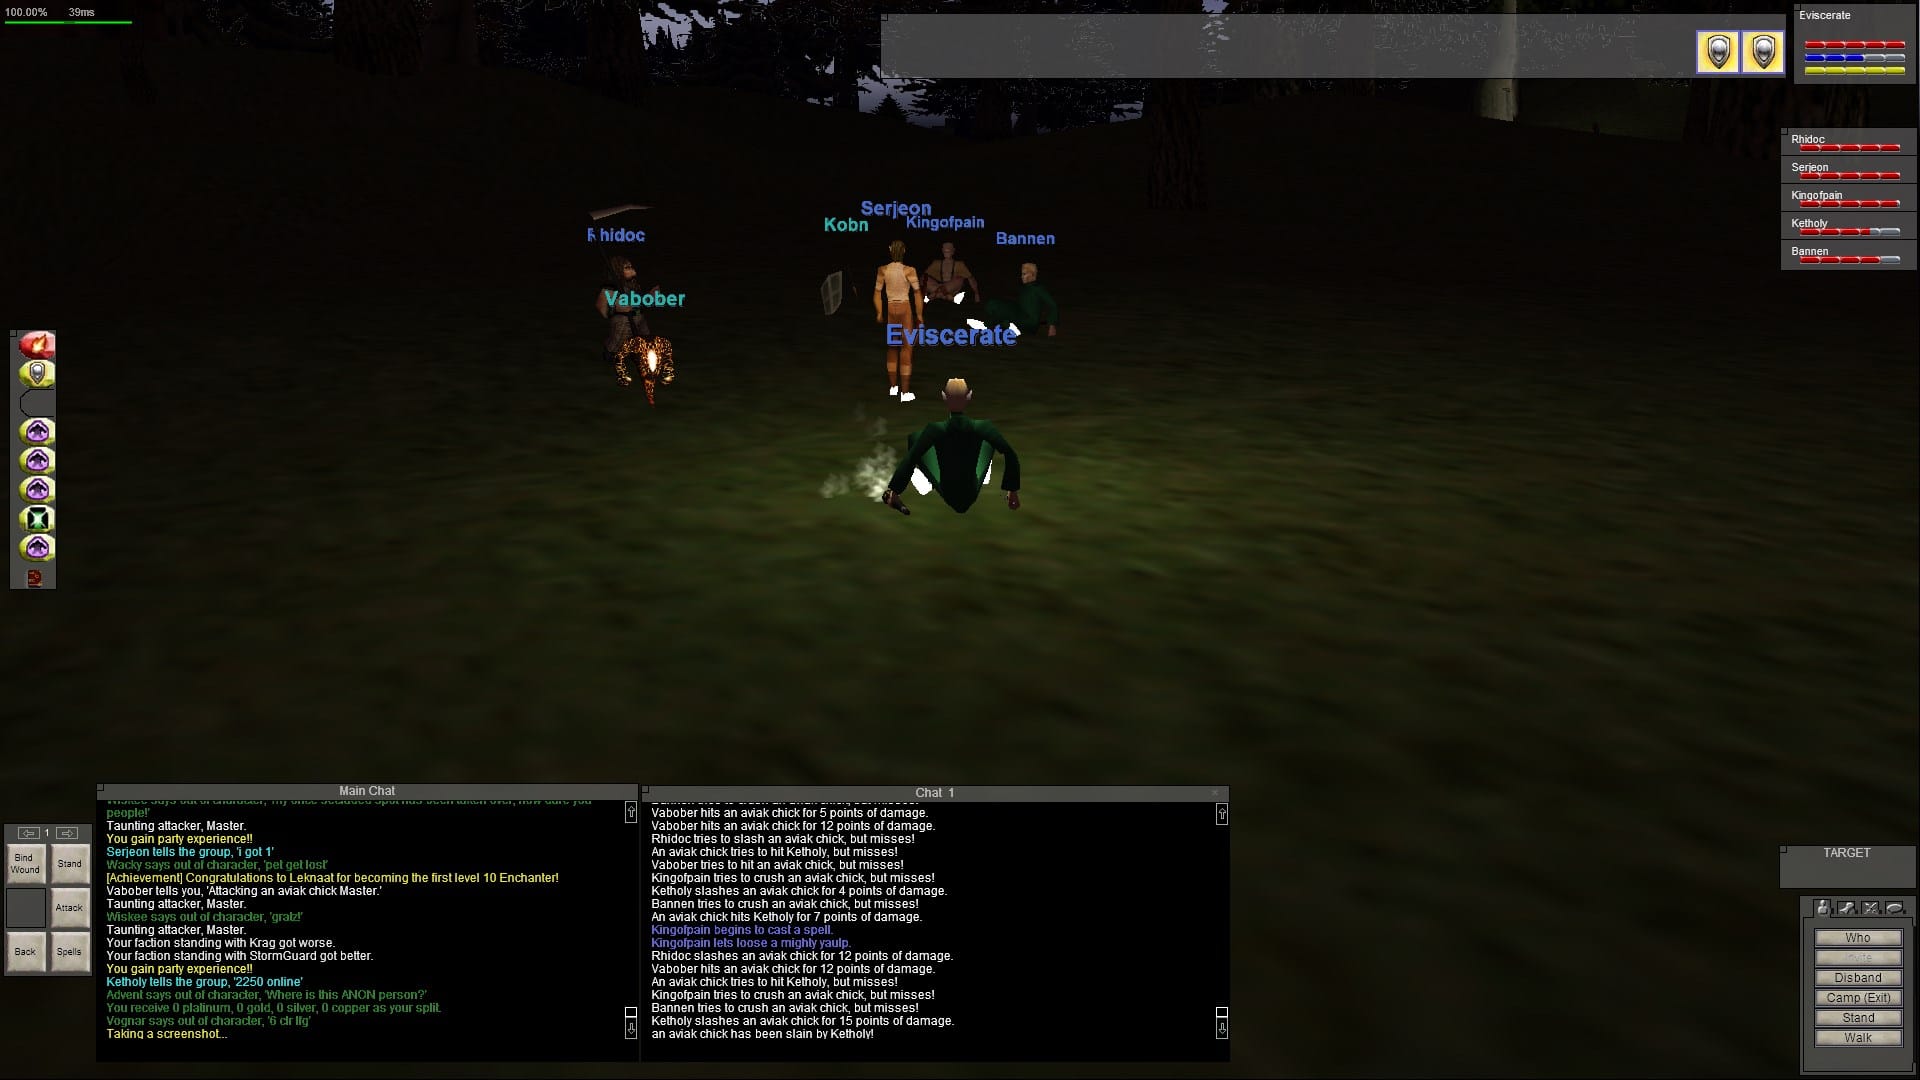 Grouping in EverQuest (Provided by P1999 community member)